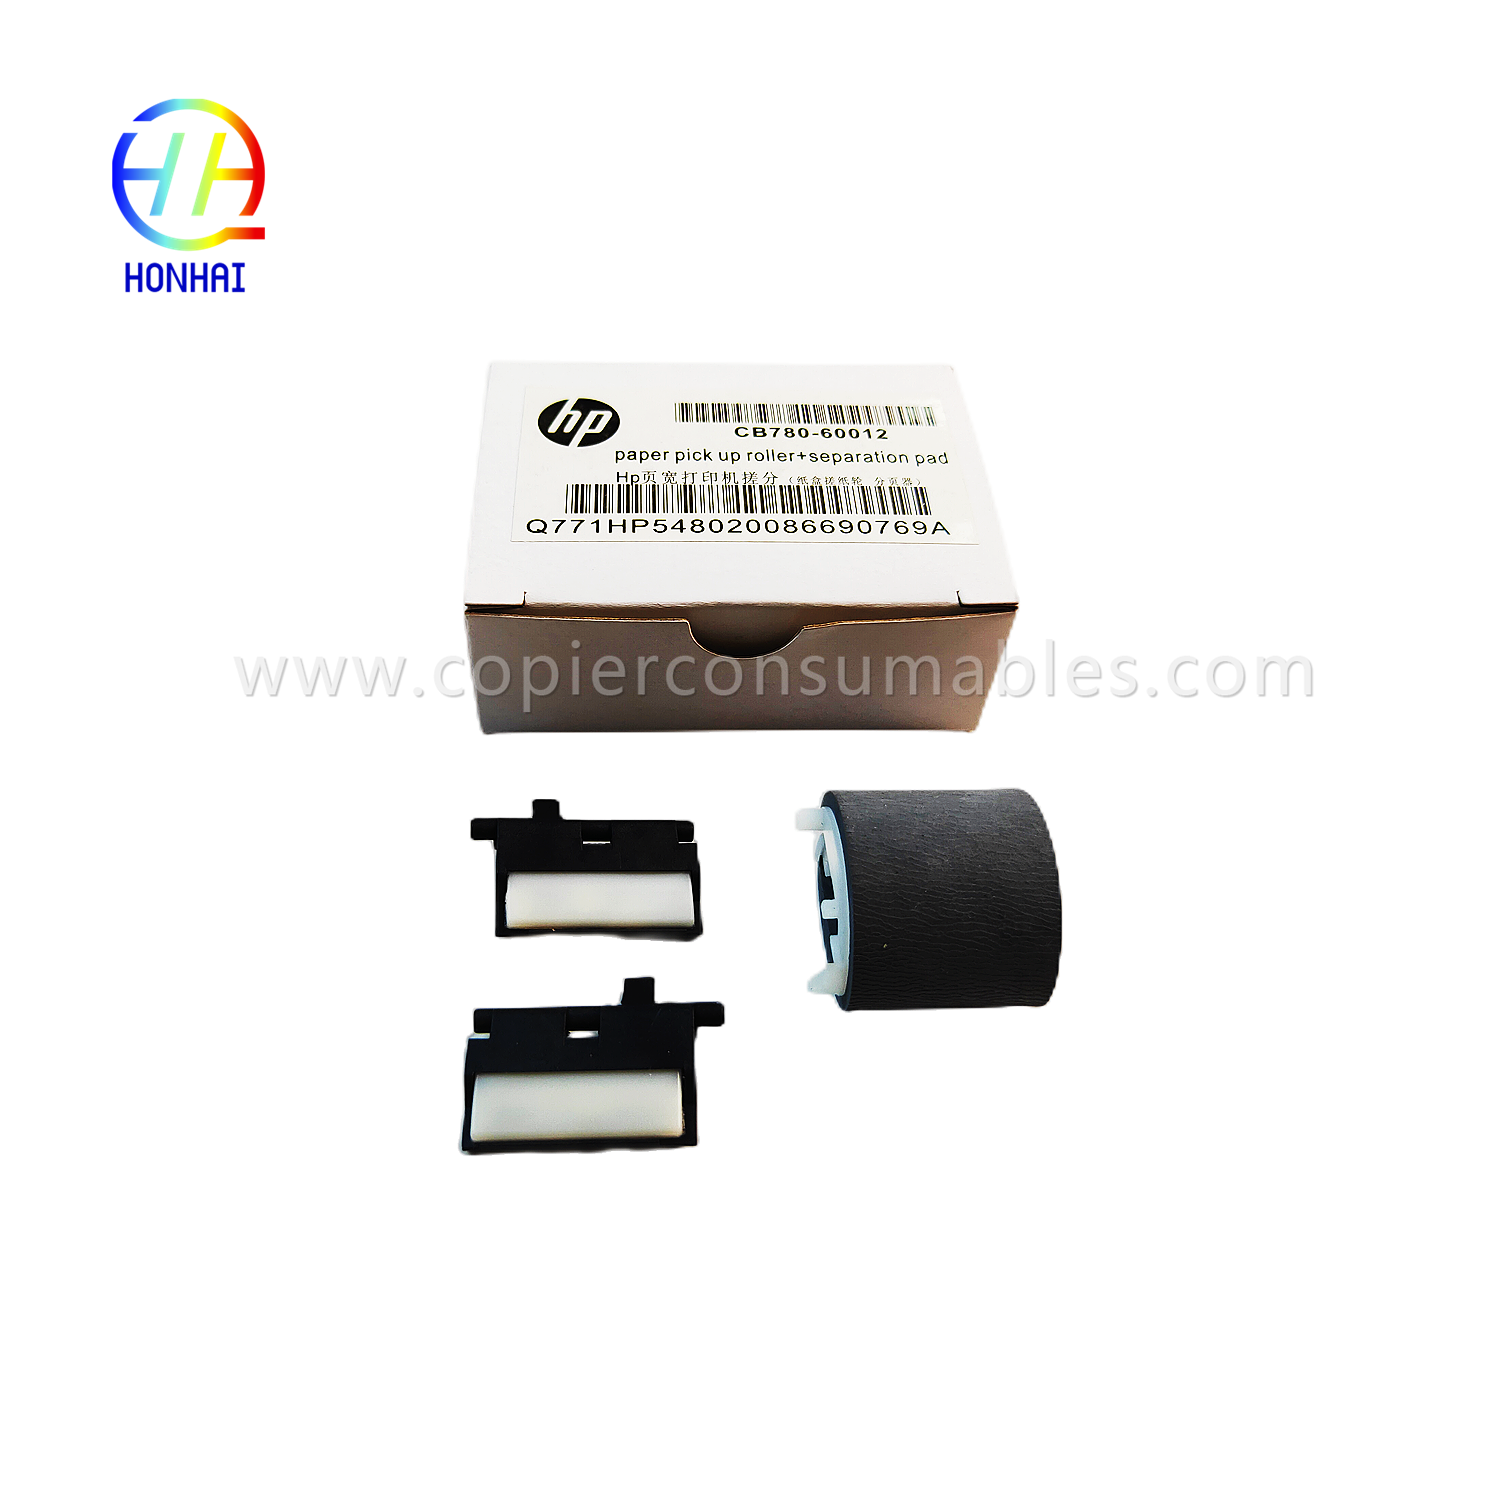 https://www.copierconsumables.com/paper-pickup-roller-separates-pad%ef%bc%88set%ef%bc%89for-hp-pagewide-x585z-x451dn-x476dn-x551dw-x576dw-556dn-586- 452dn-477dn-552-577z-cb780-60012-product/